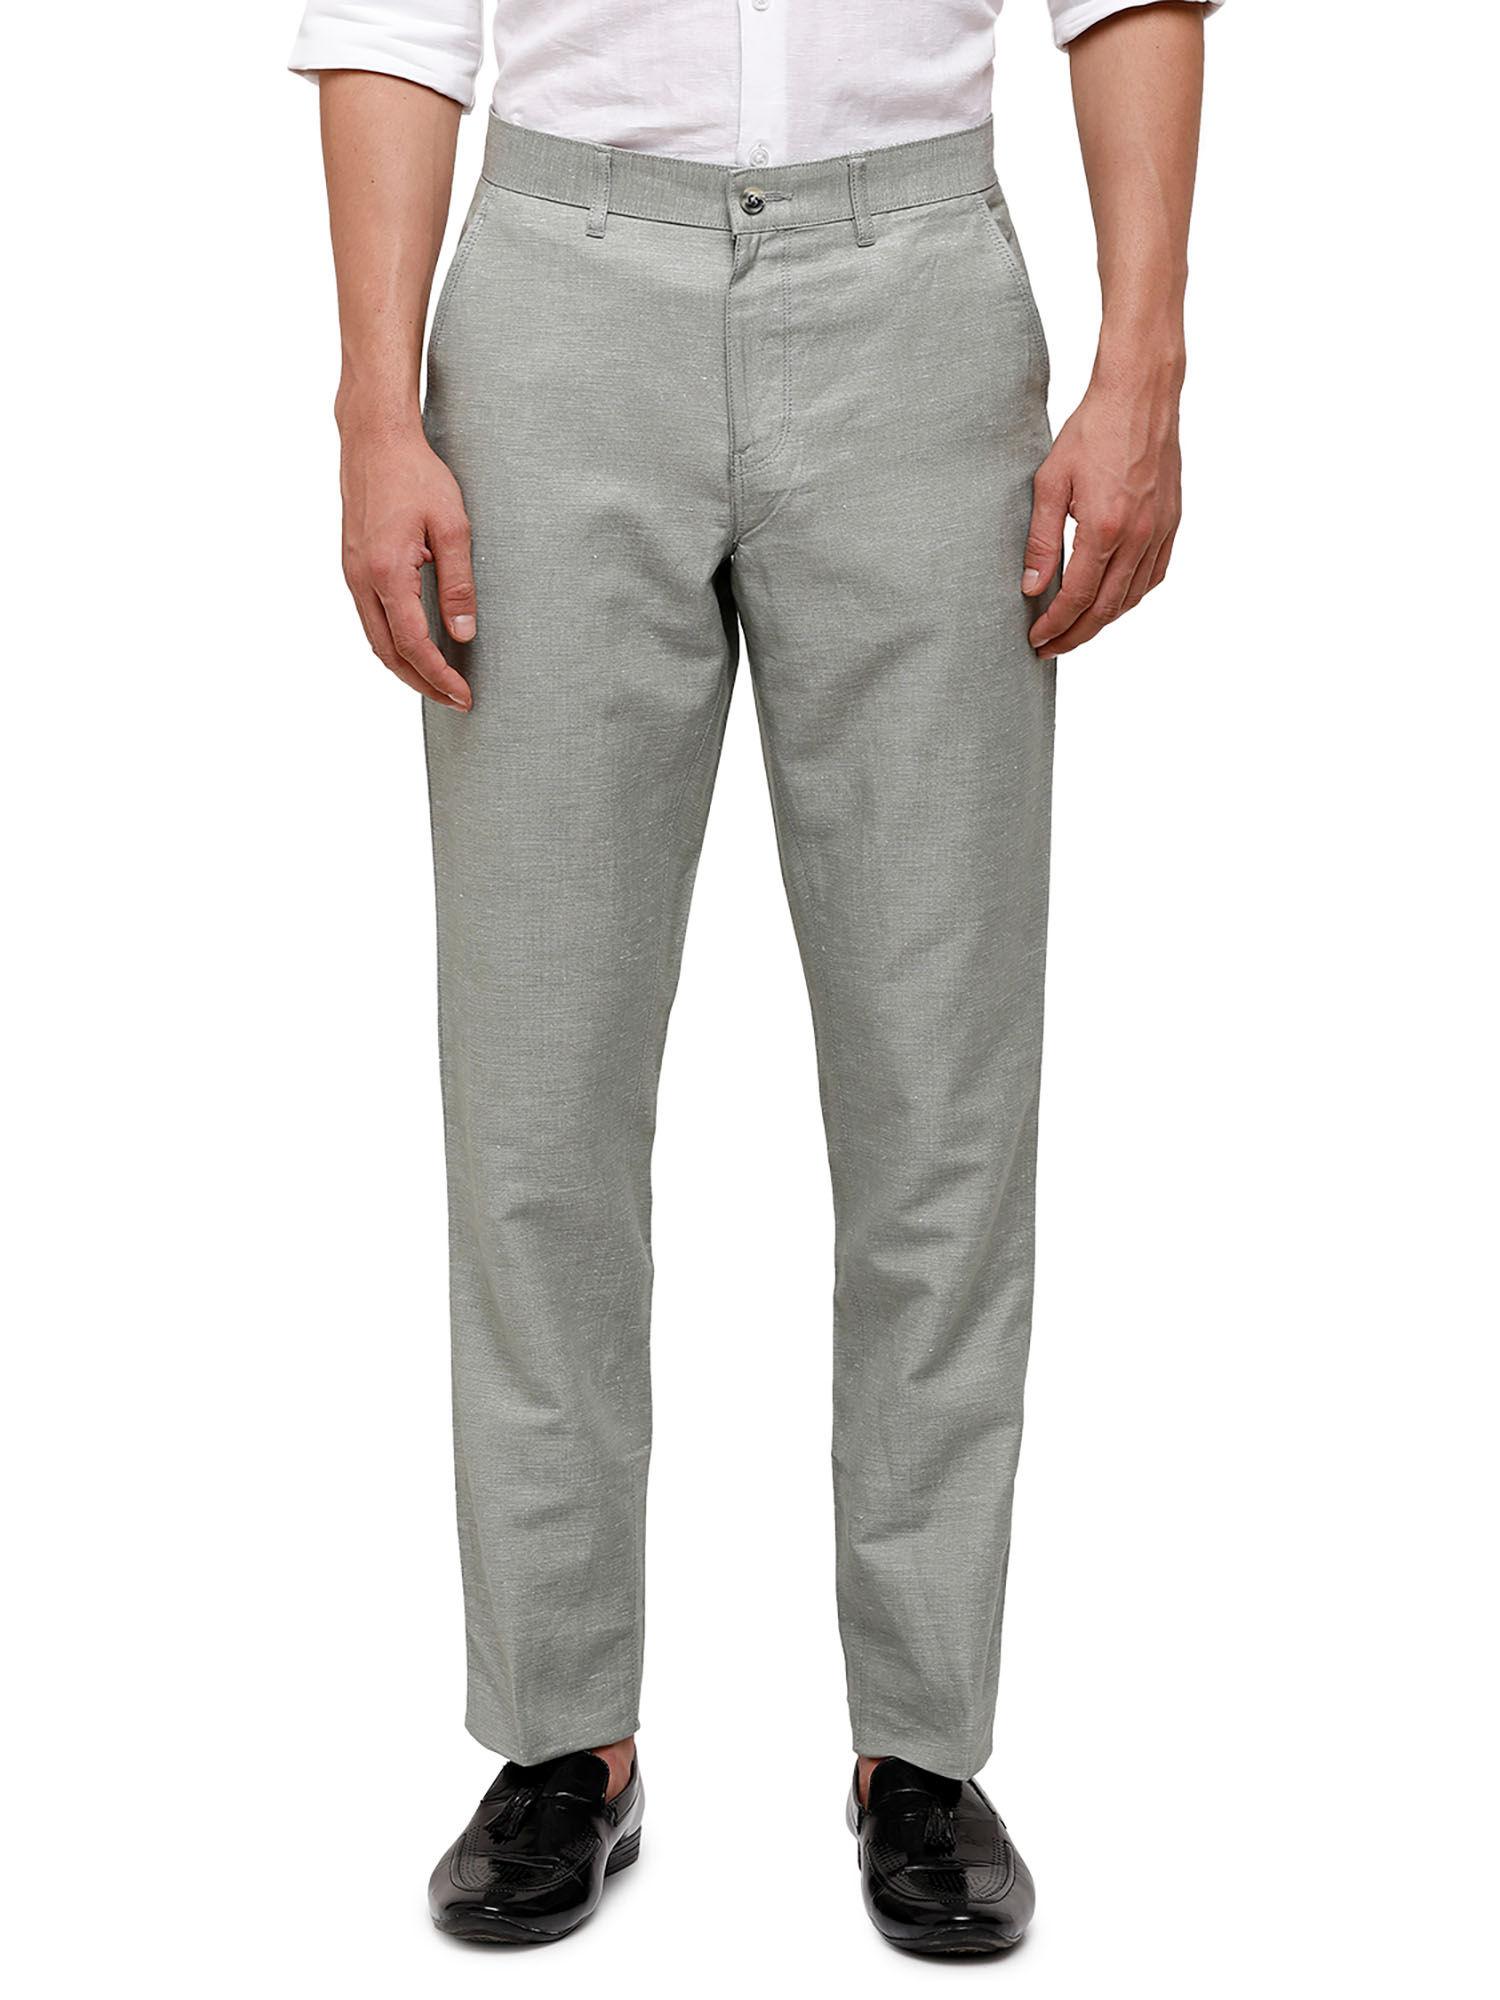 solid casual mid rise grey trouser for men